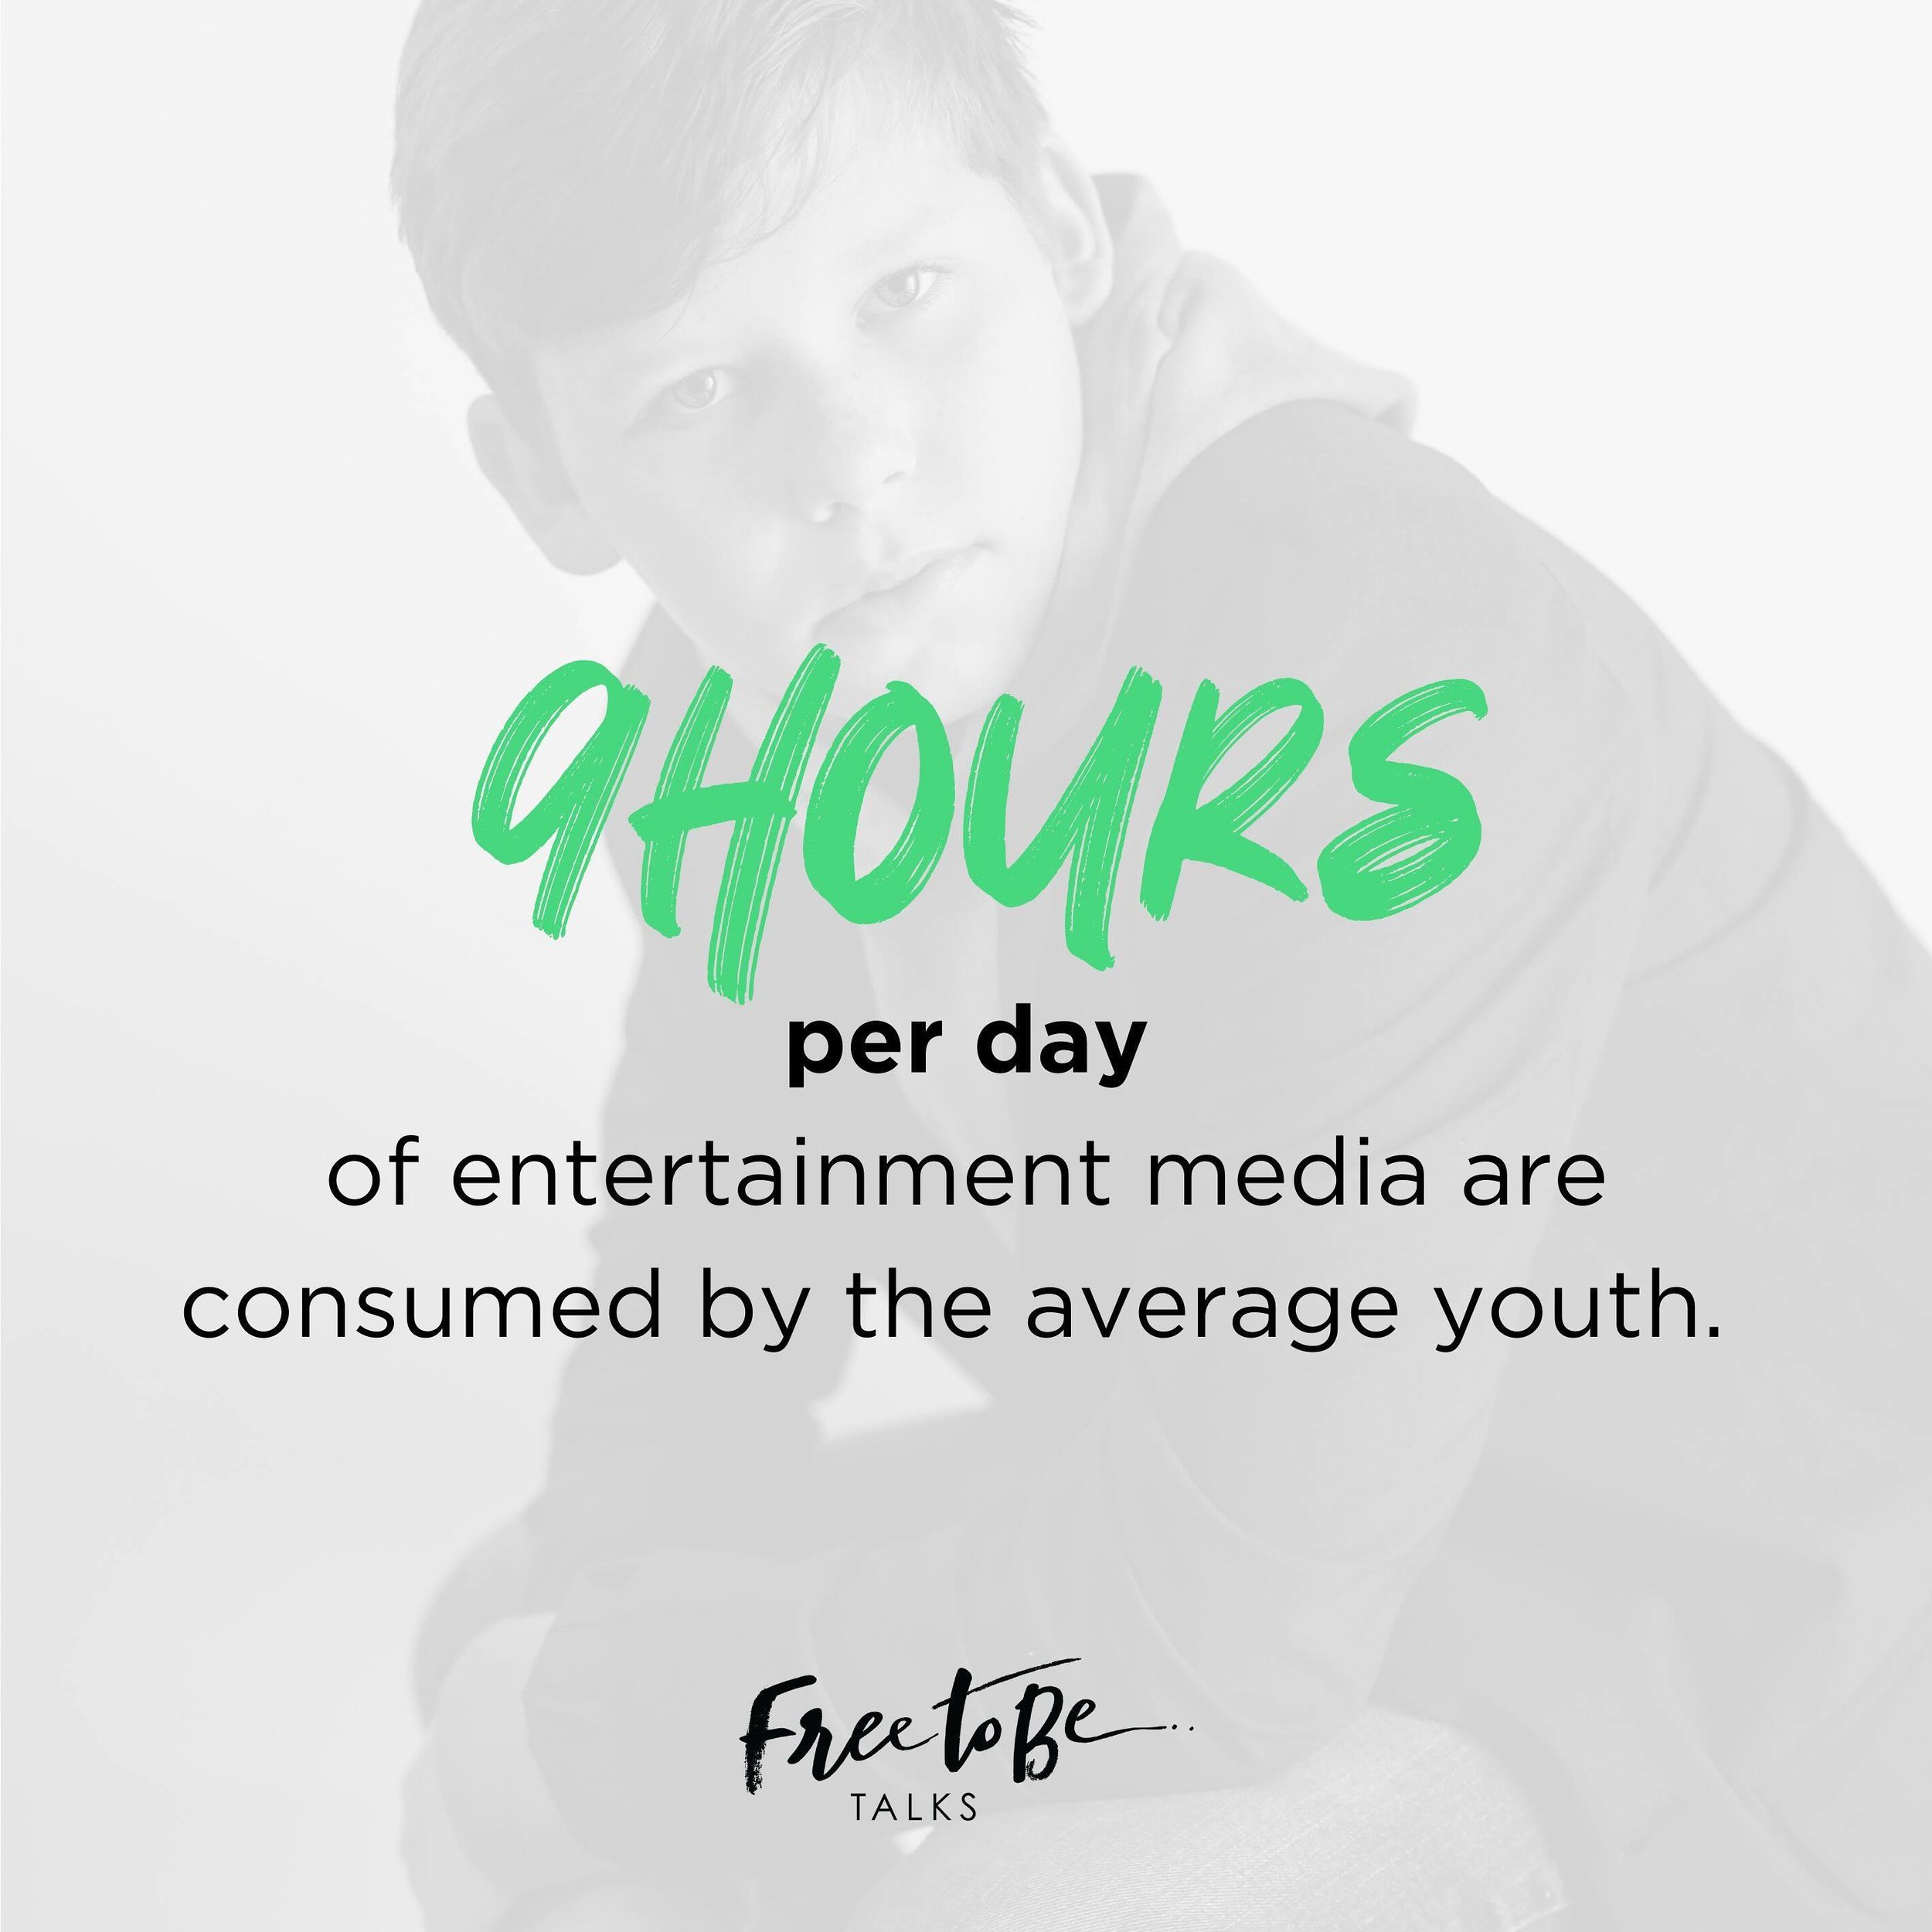 Did you know that on average, youth consume 9 hours of media per day? 🖥️

Here are 5 things for parents to consider if you have kids using technology:

1. Are you involved in your kids online activity? Do you know what they are doing and who they ar